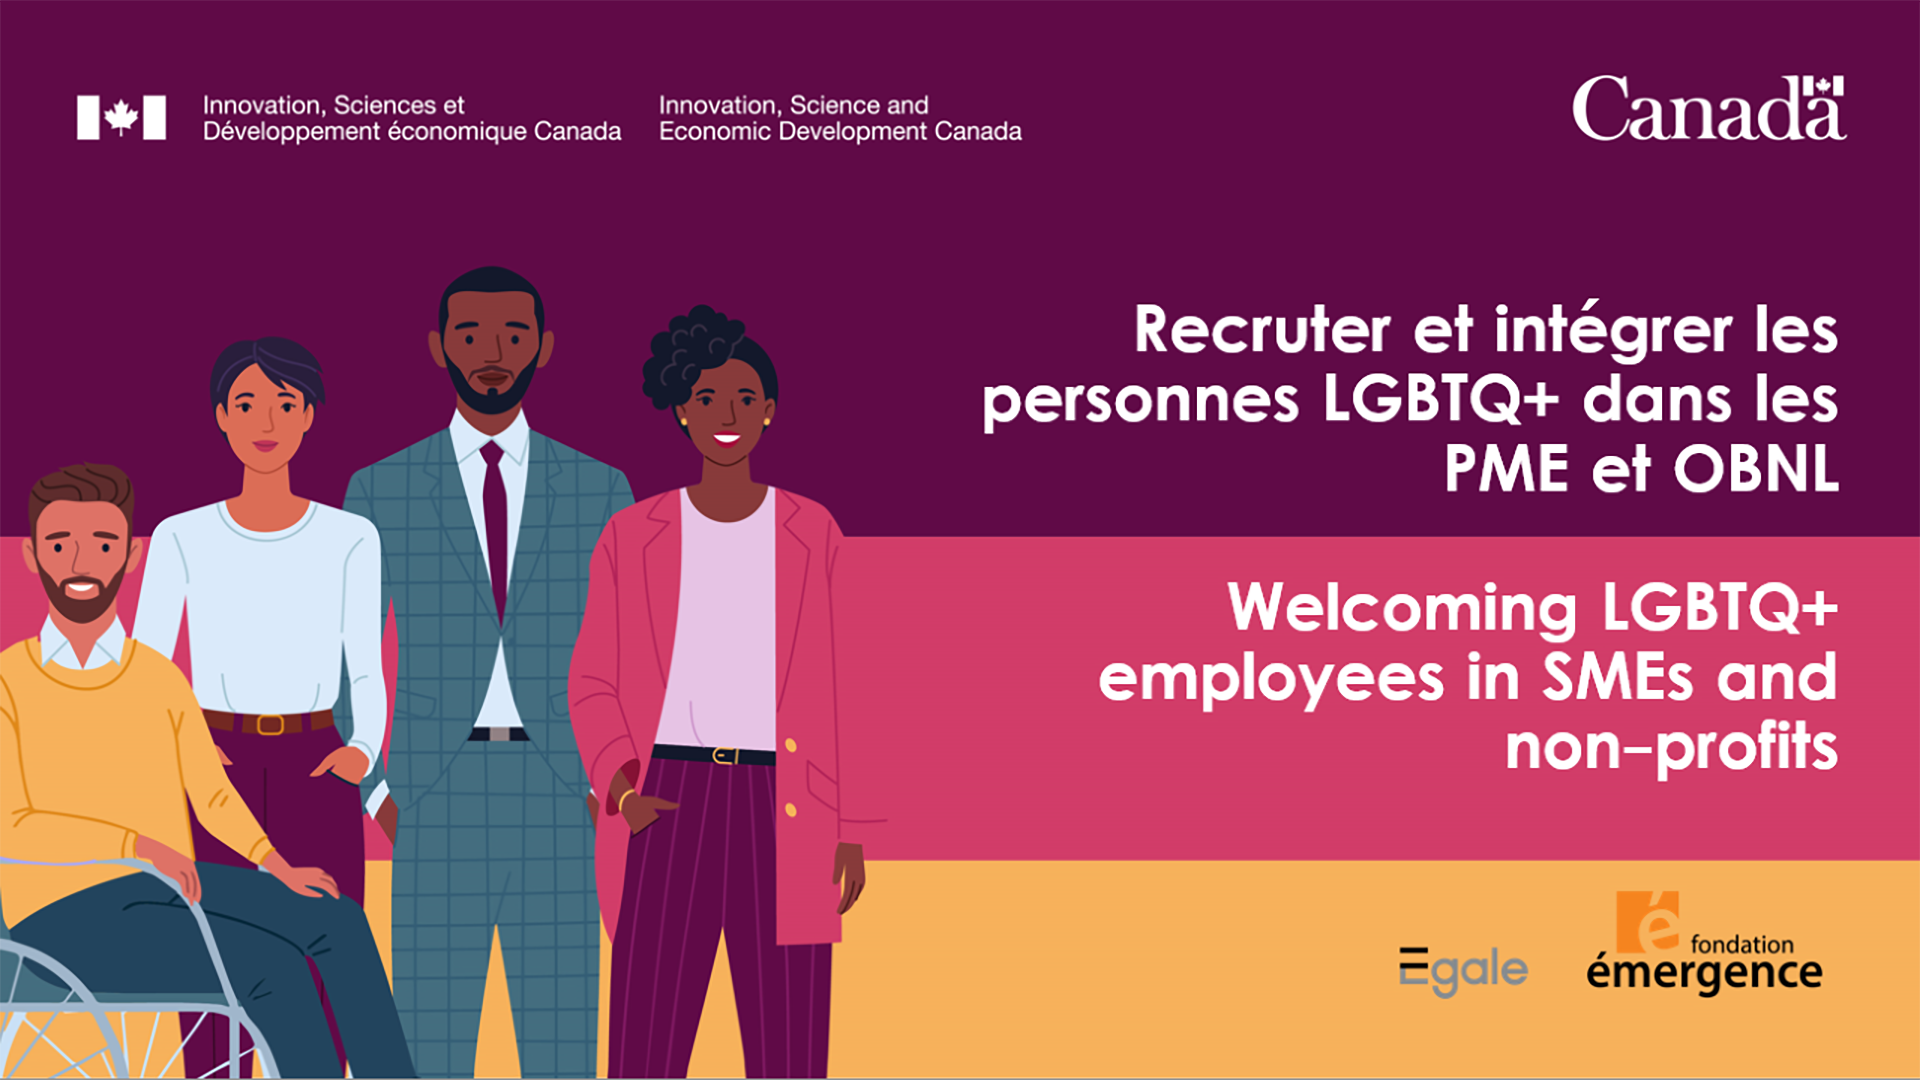 Welcoming LGBTQ+ employees in SMEs and non-profits